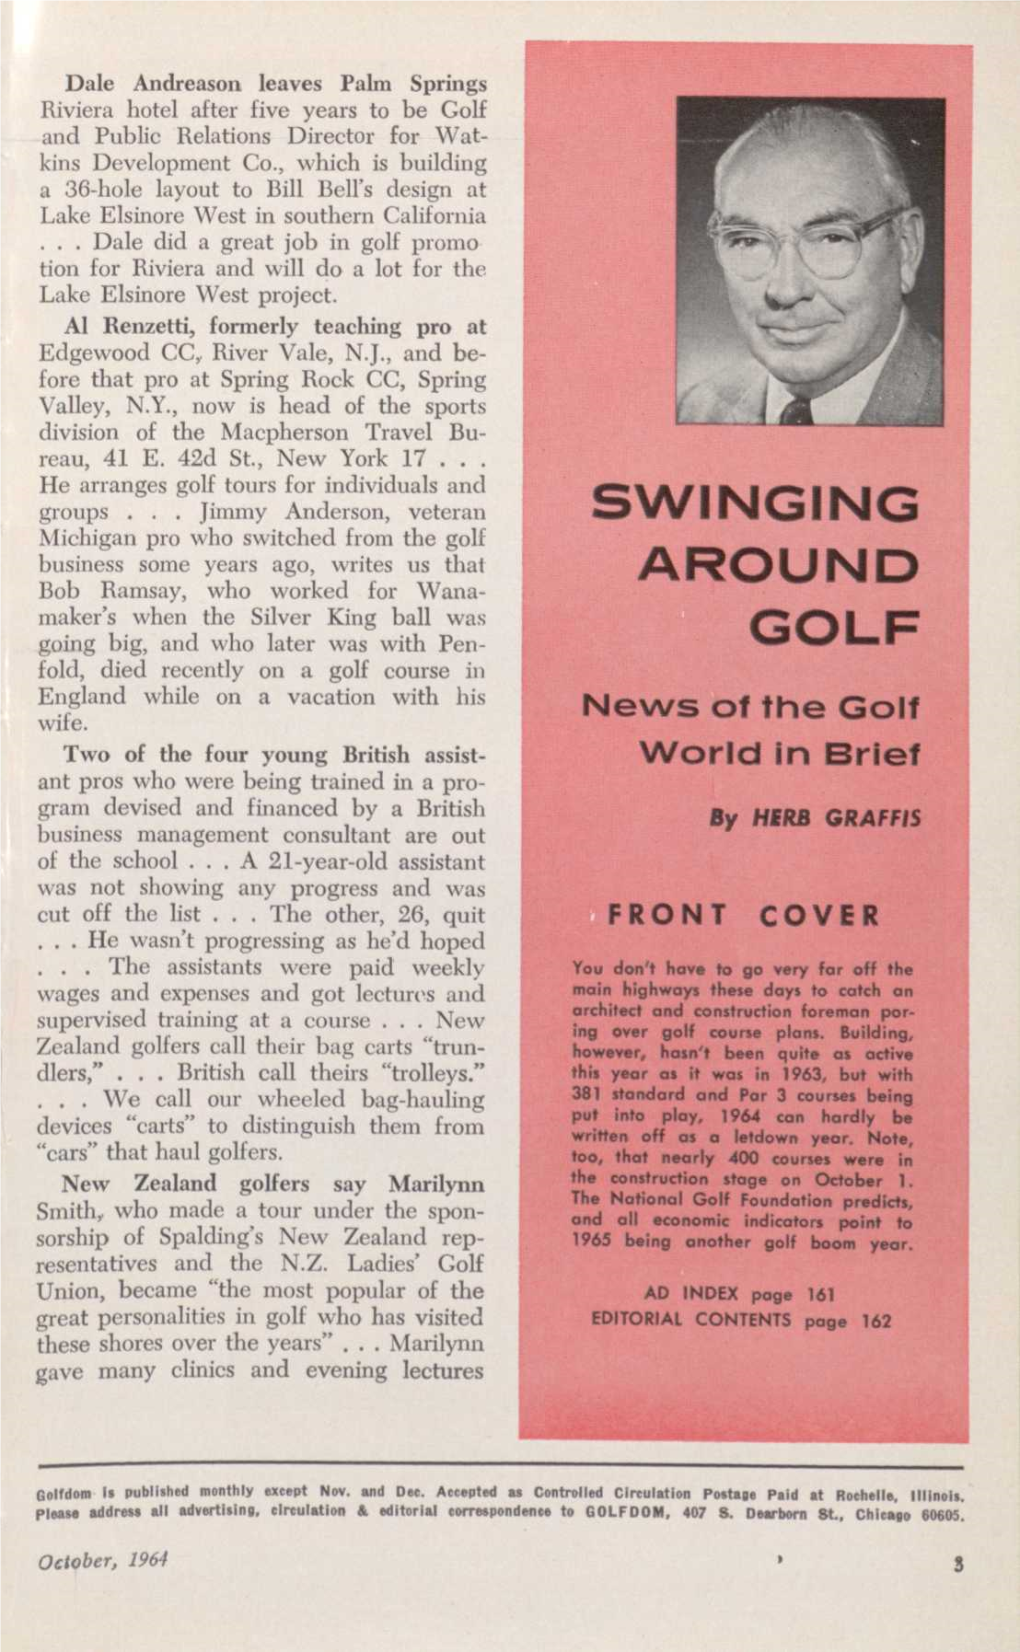 Swinging Around Golf (Continued from Page 30) Manager at Stamford (N.Y.) GC to Be Pro-Supt